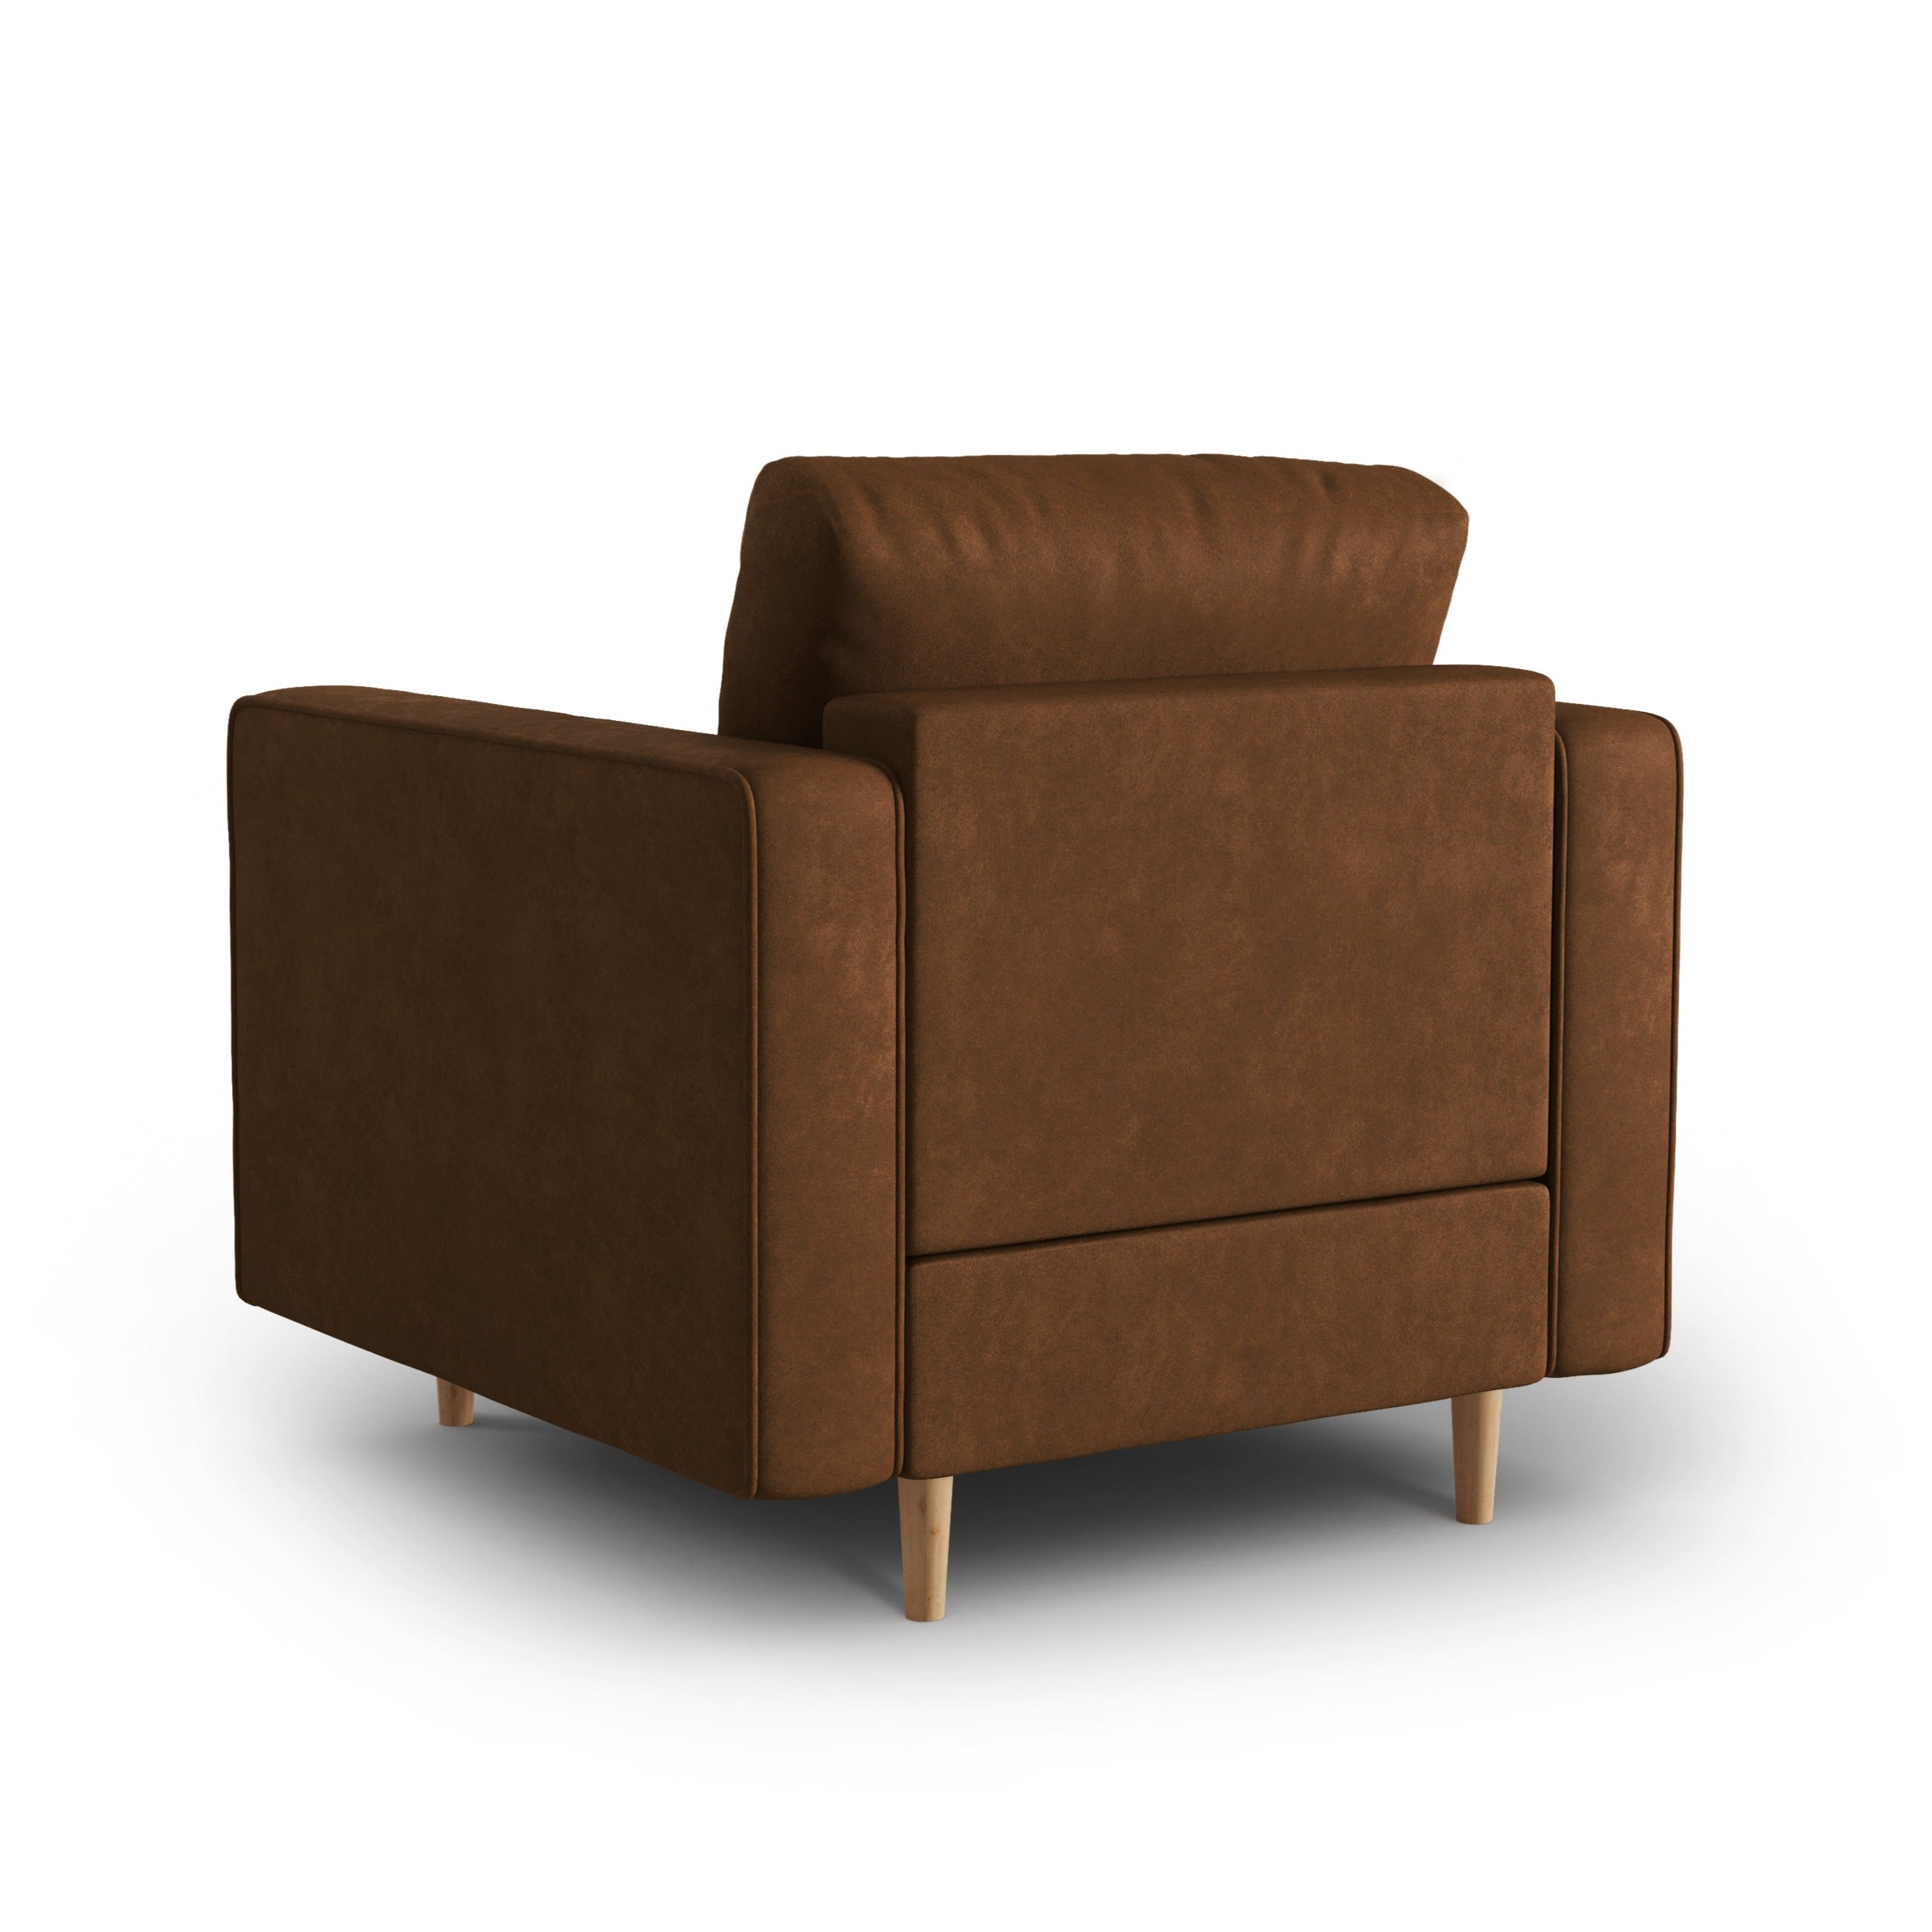 Cuoio armchair with a wooden base